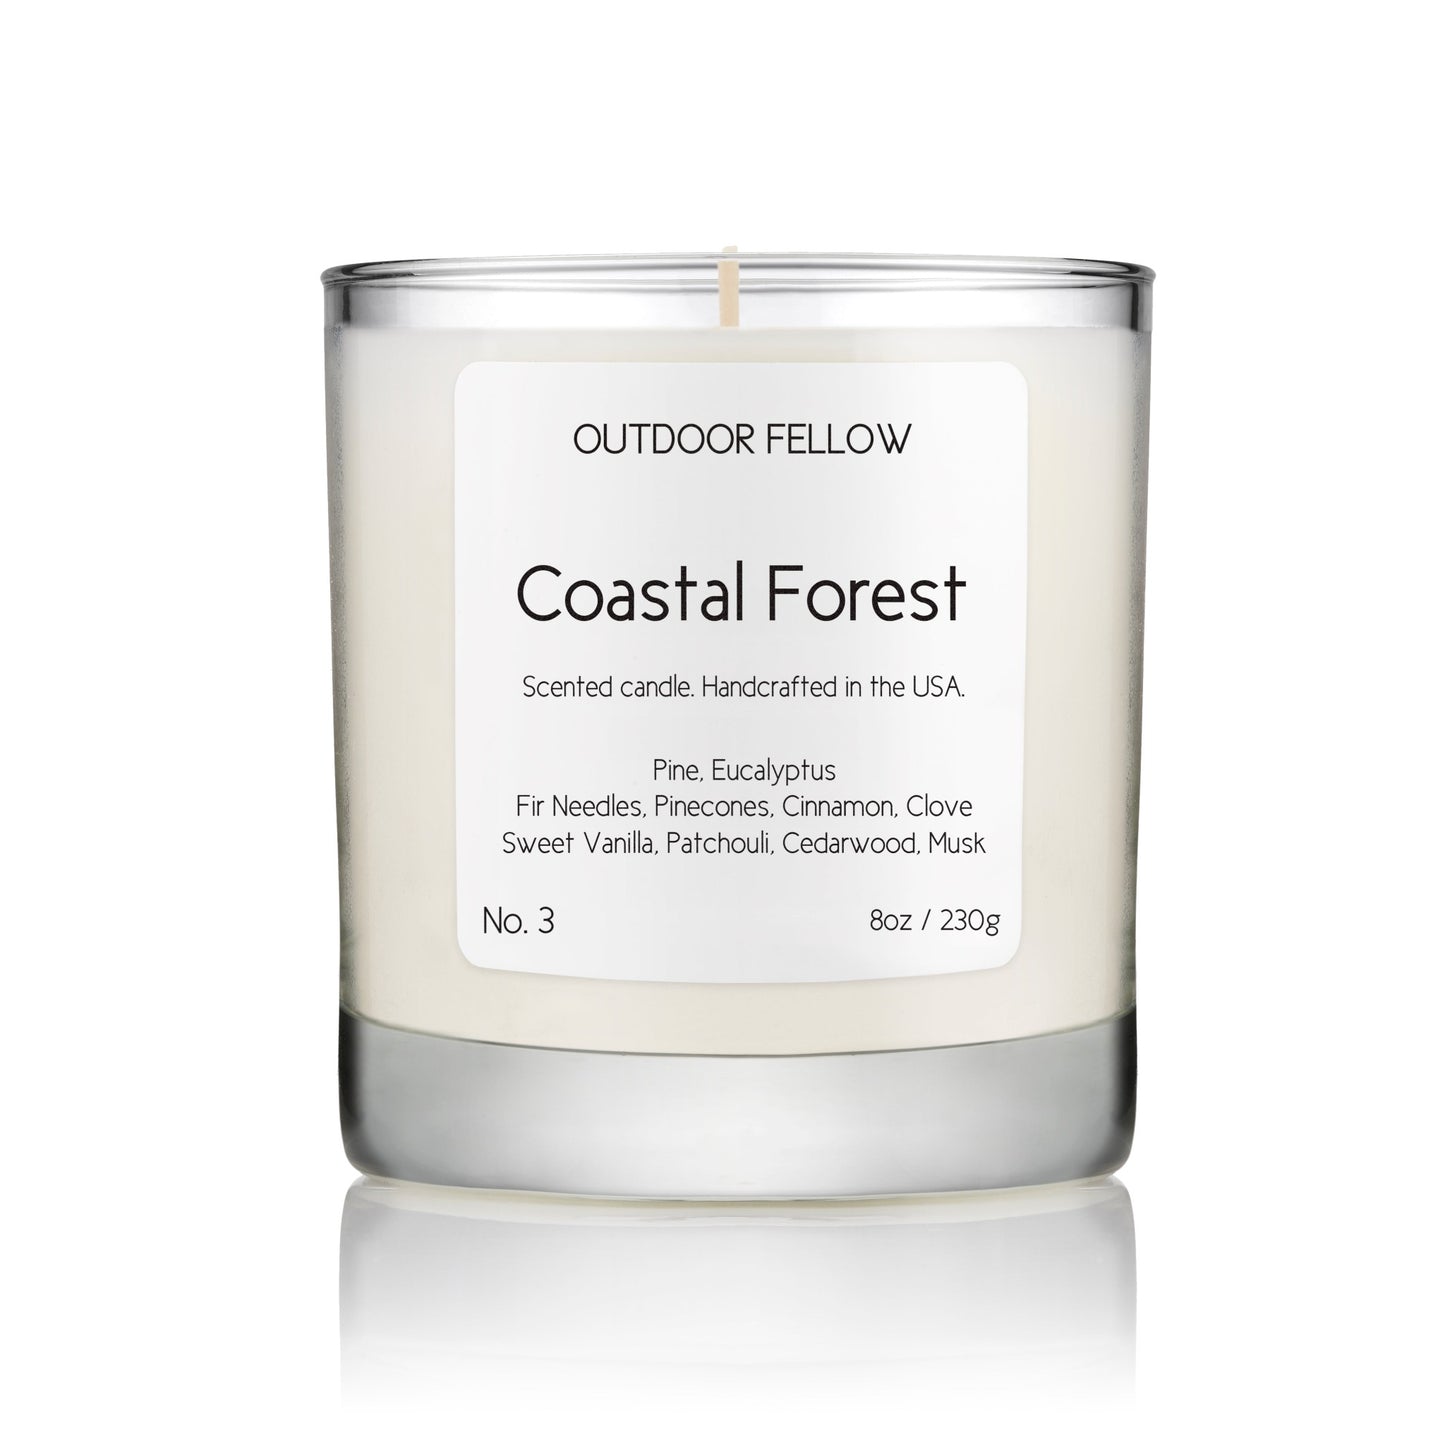 Coastal Forest scented candle on white background